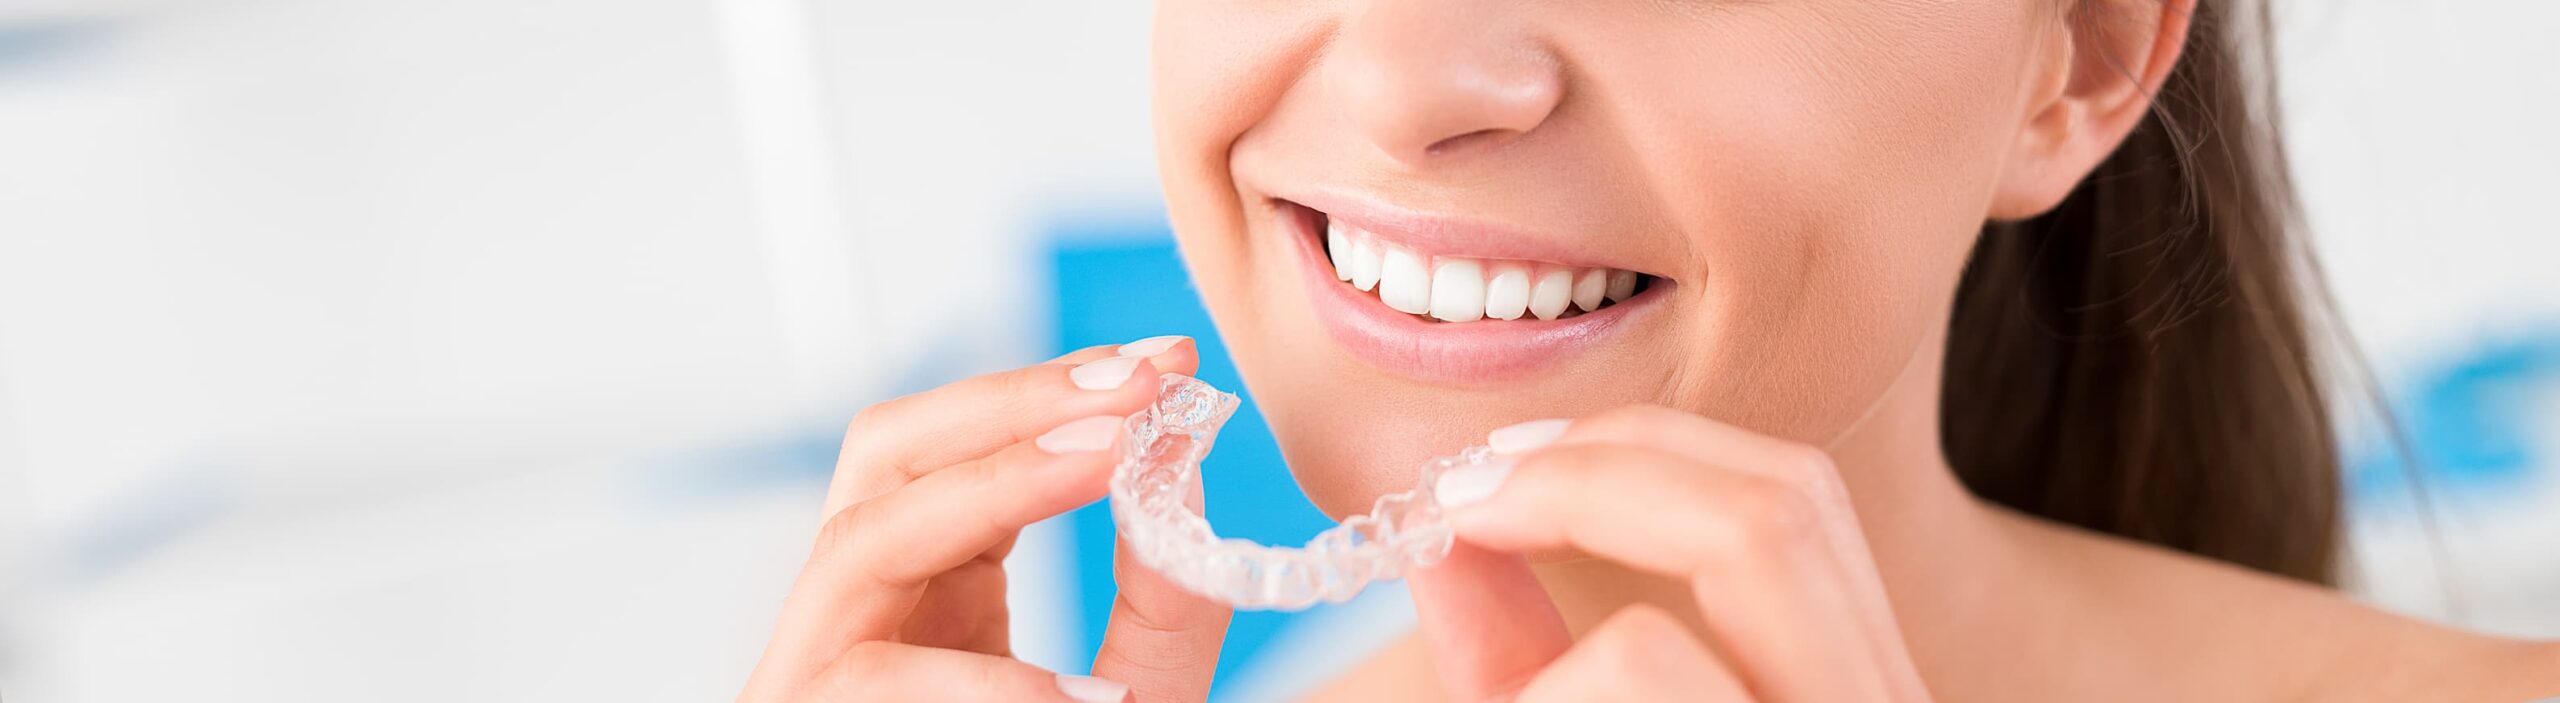 5 Reasons to Consider Invisalign Over Dental Braces